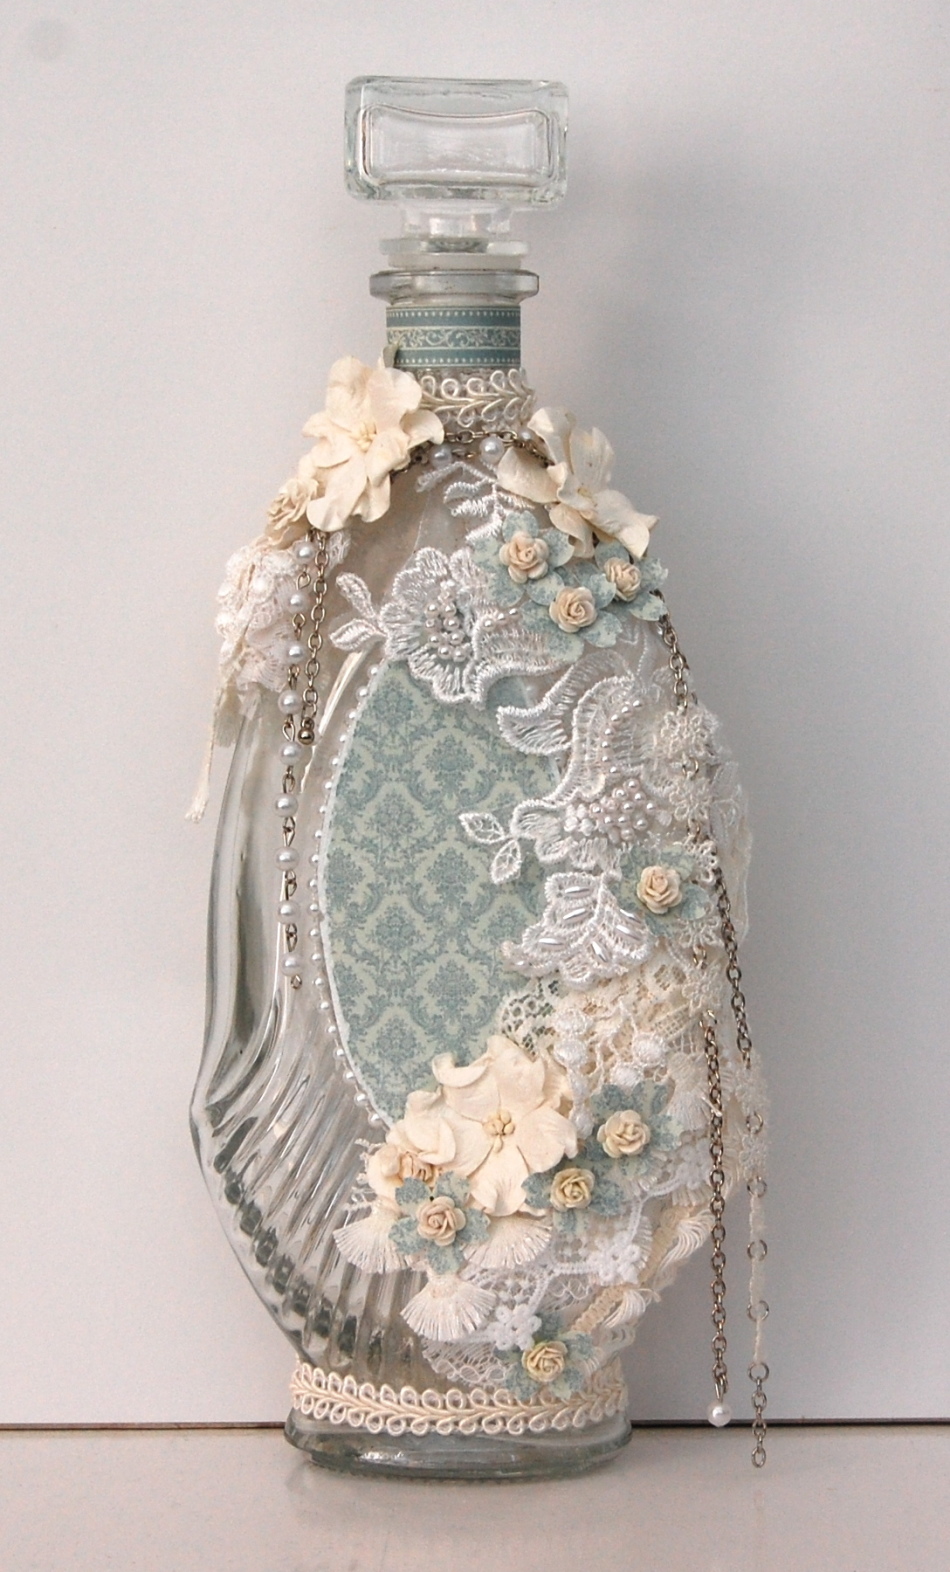 Decoupage of bottles of lace - a fairly elegant gift